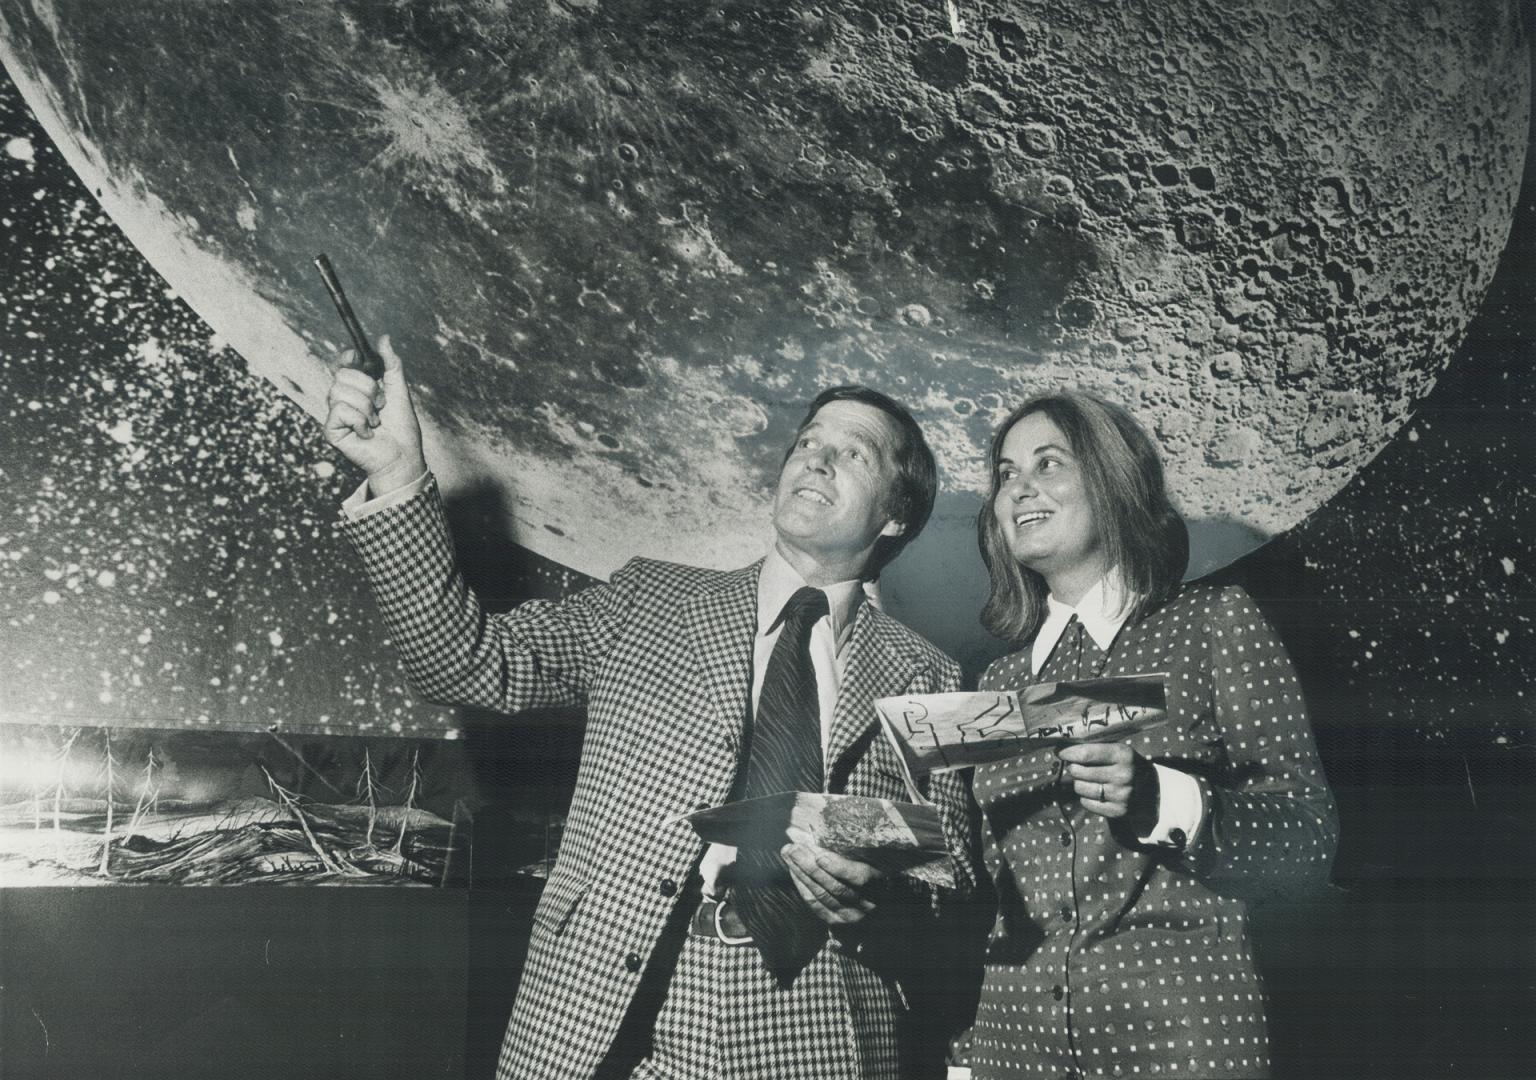 Reaching for the moon: It looks like it as John Eleen, one of the new trustees of the Royal Ontario Museum, points out a display to his wife Luba at the opening of the ROM: Nature's Biographer exhibition last night.